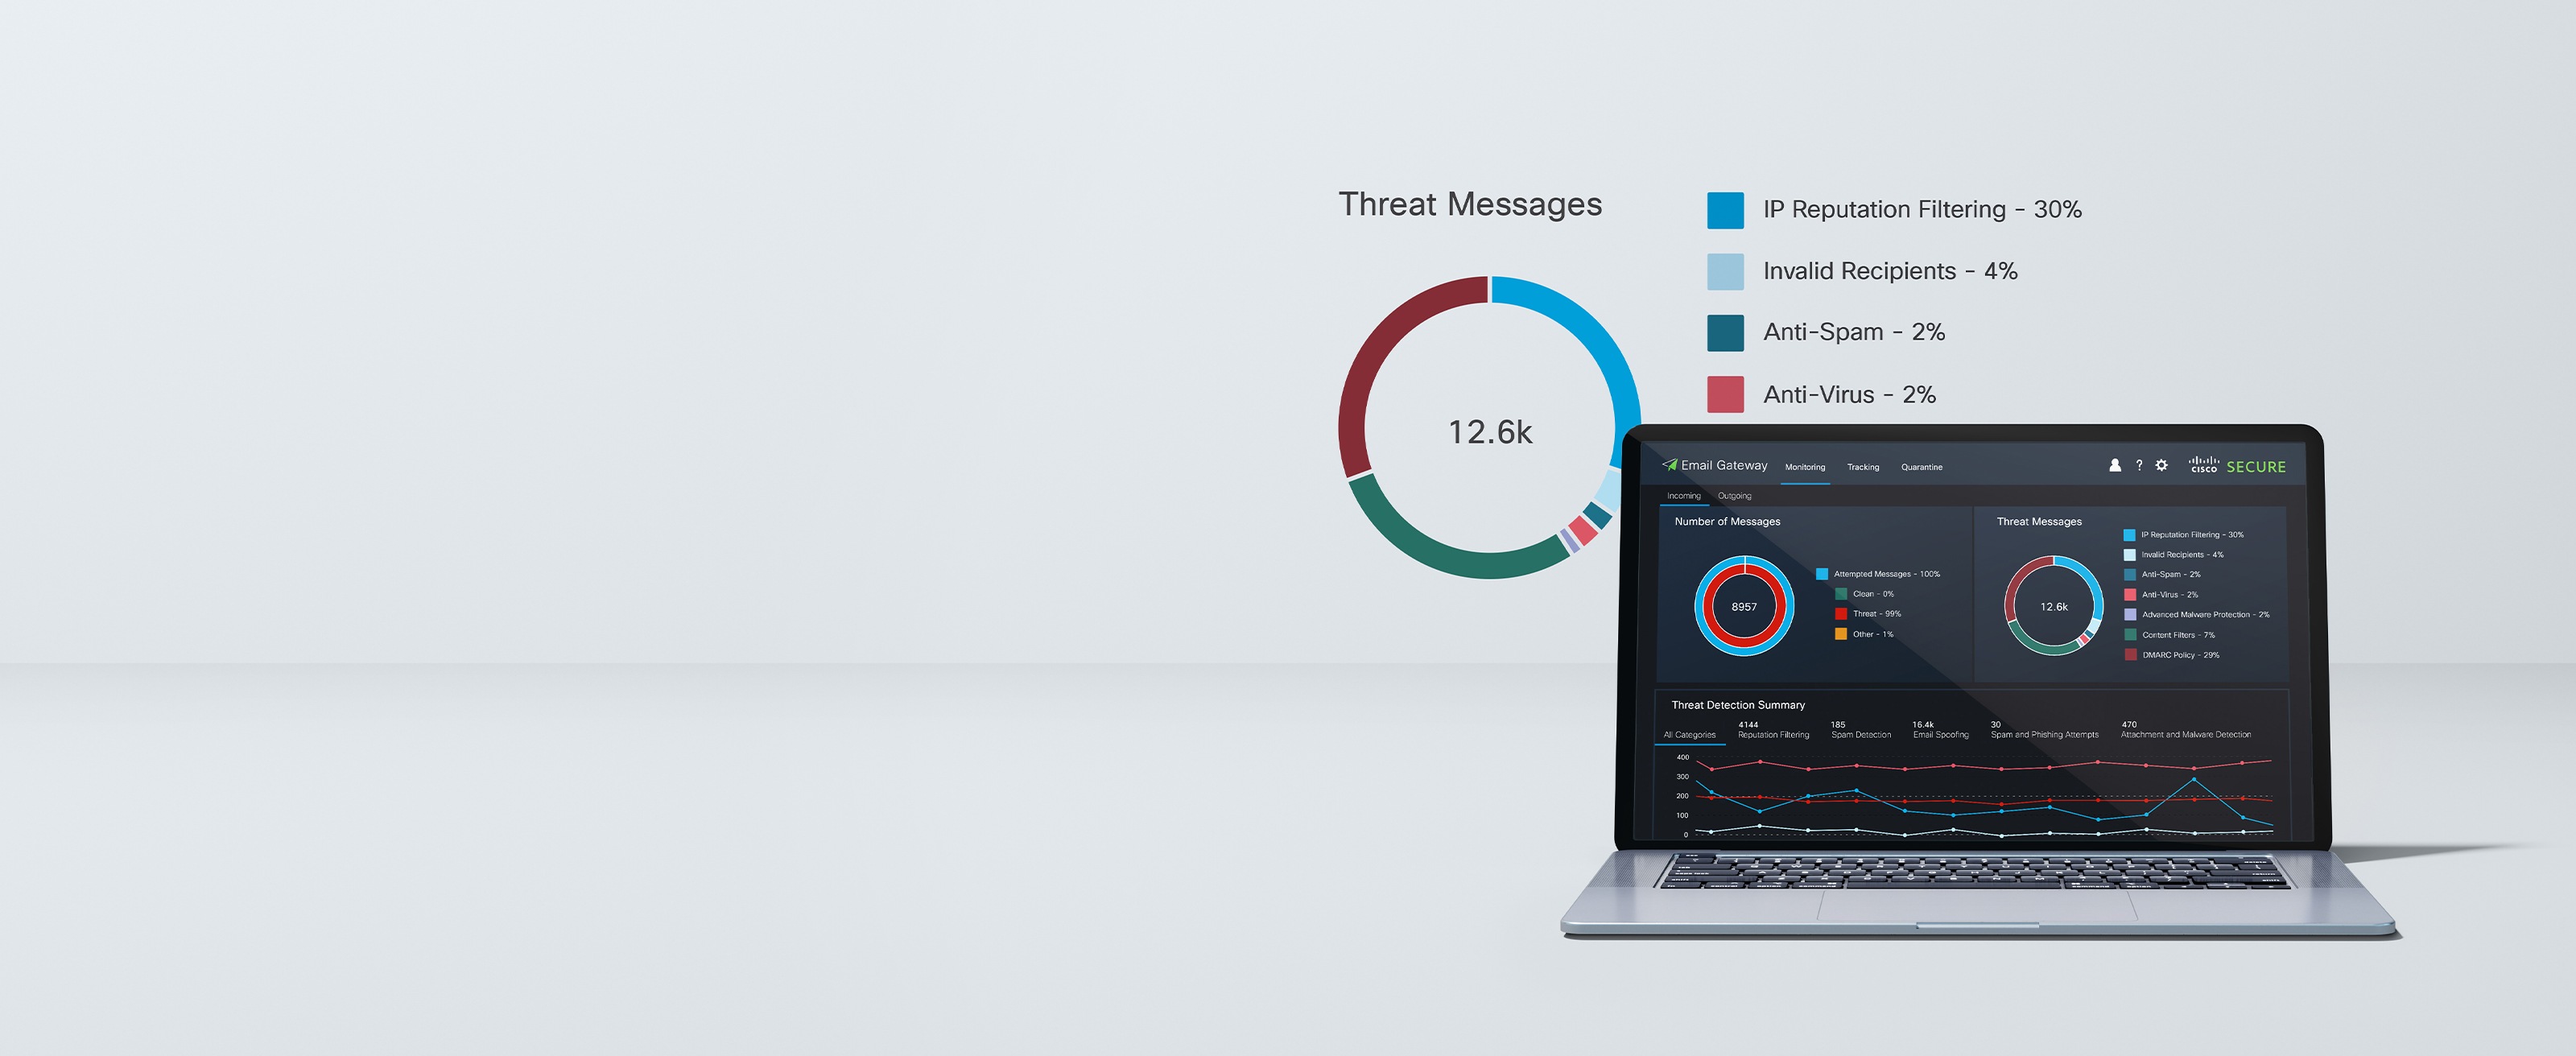 Laptop depicting dashboard UI for secure email software